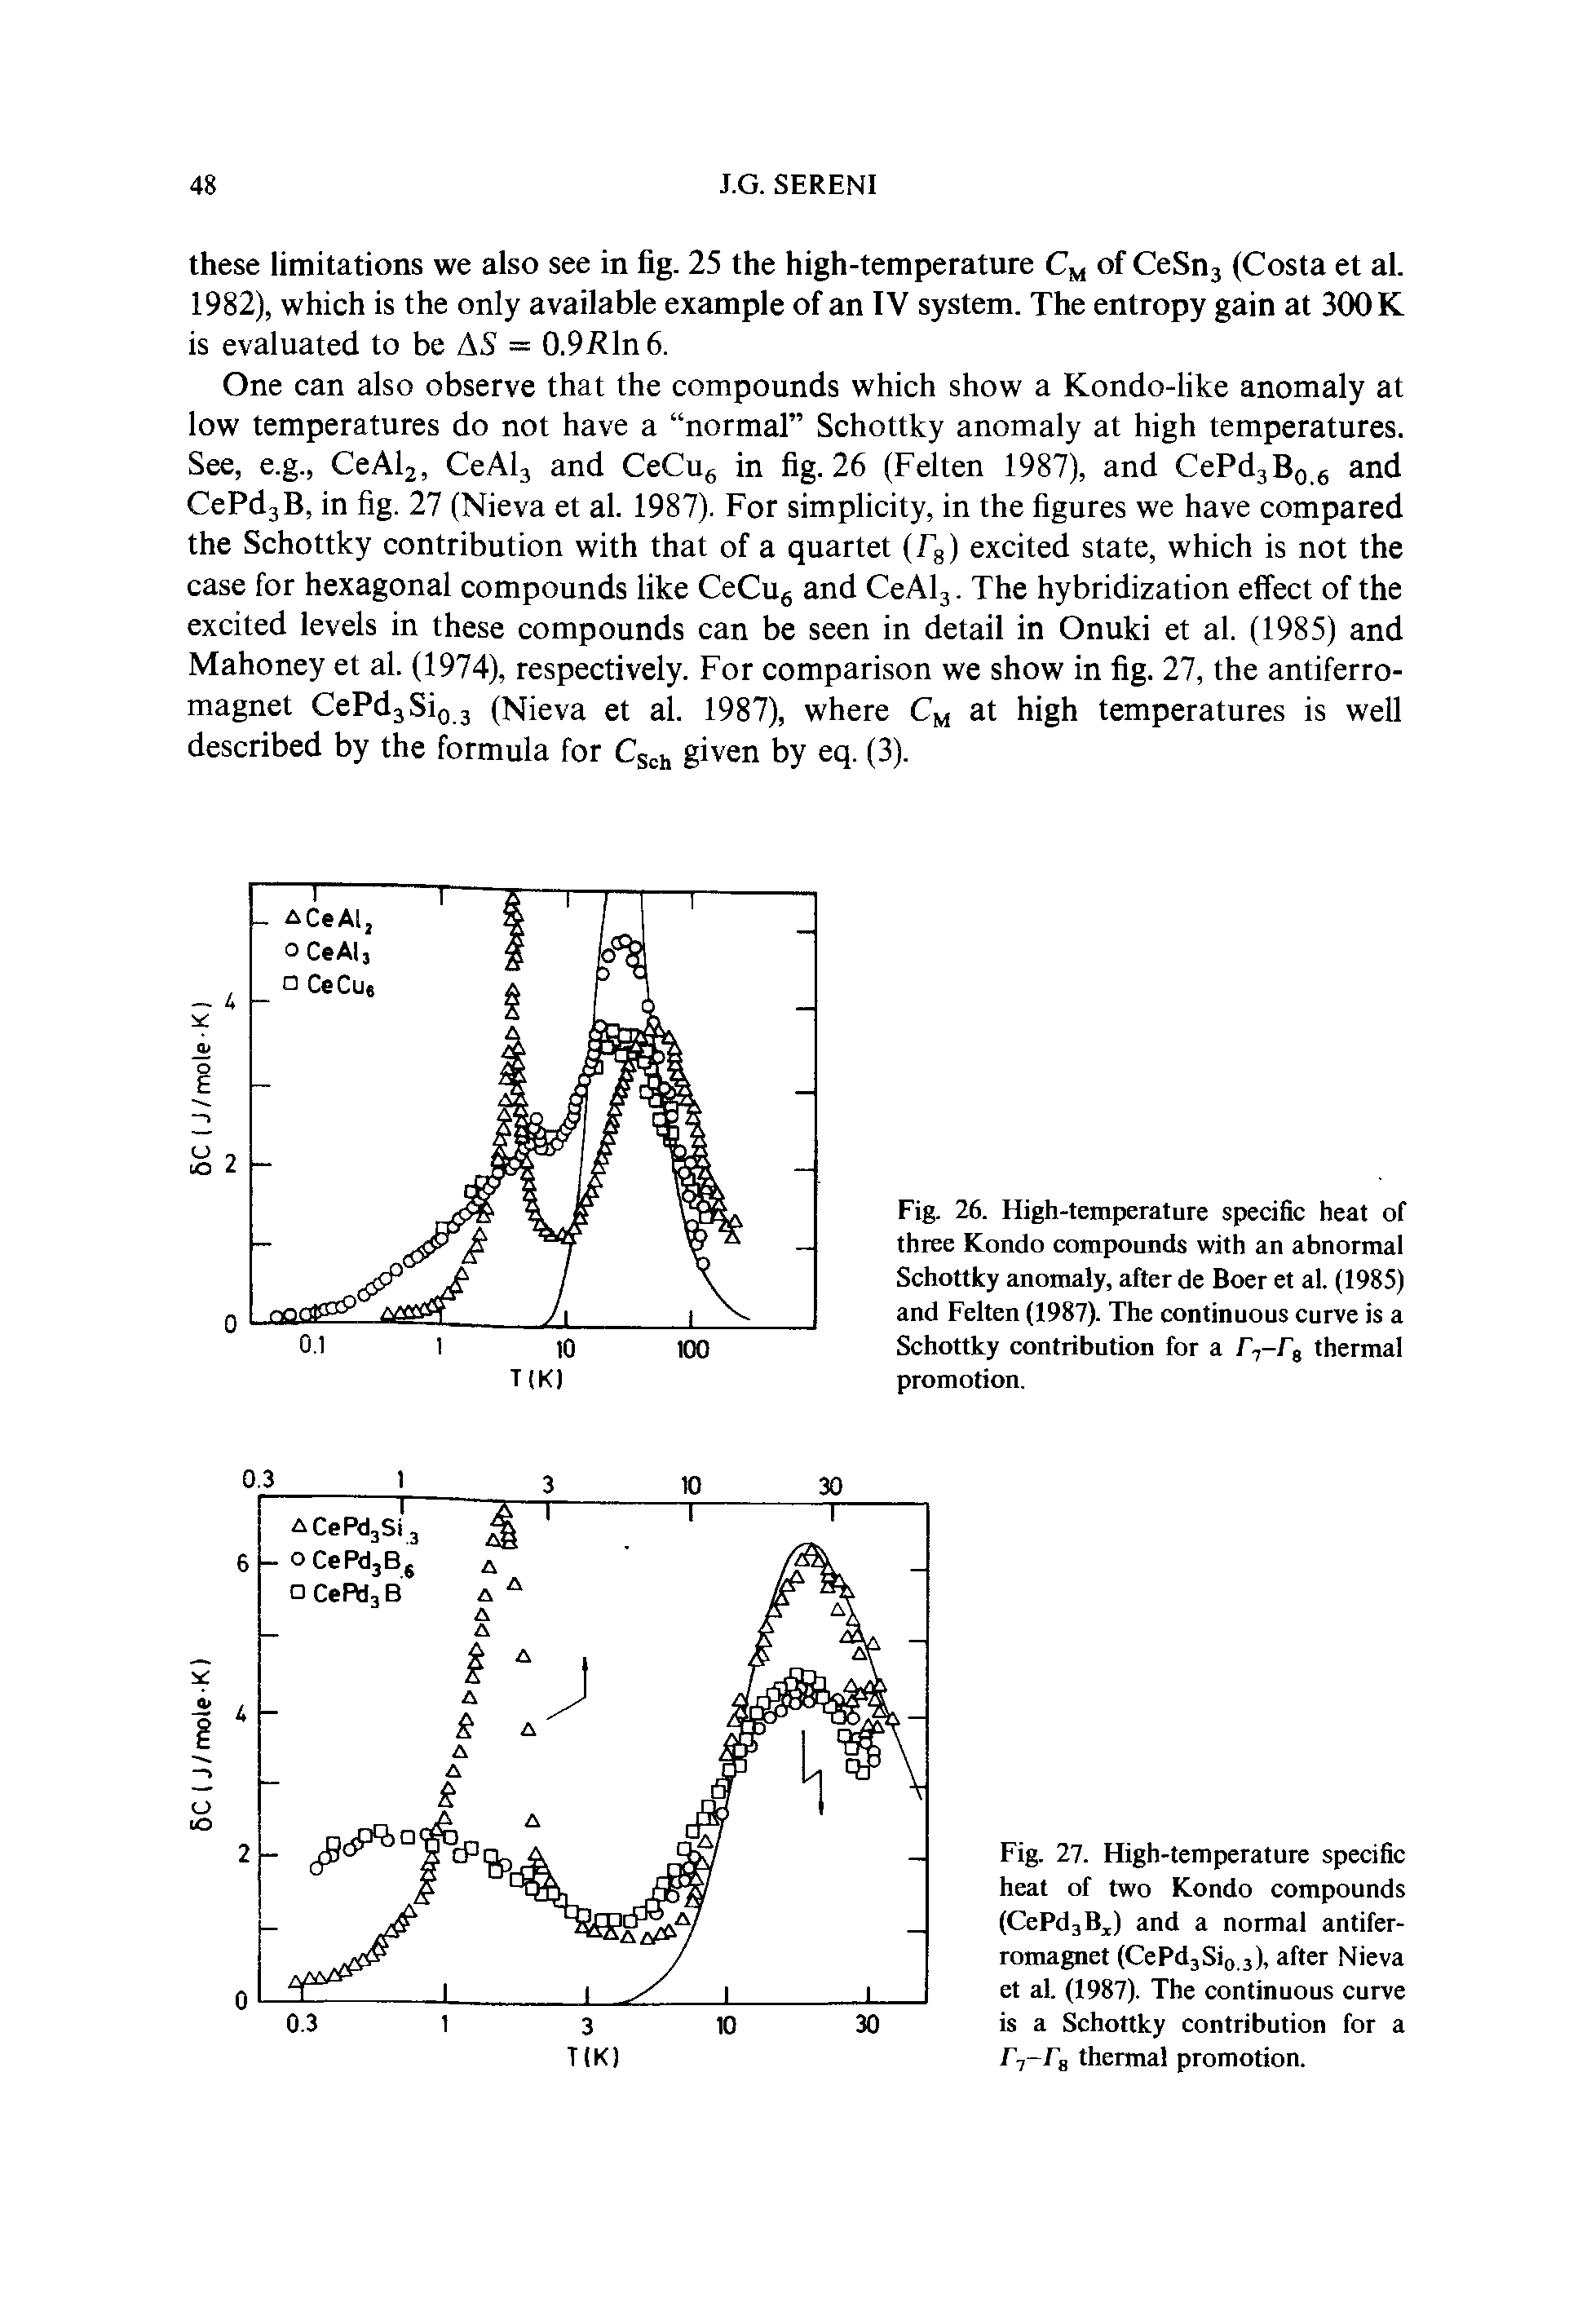 Fig. 26. High-temperature specific heat of three Kondo eompounds with an abnormal Schottky anomaly, after de Boer et al. (1985) and Felten (1987). The continuous curve is a Schottky contribution for a F-j-Fg thermal promotion.